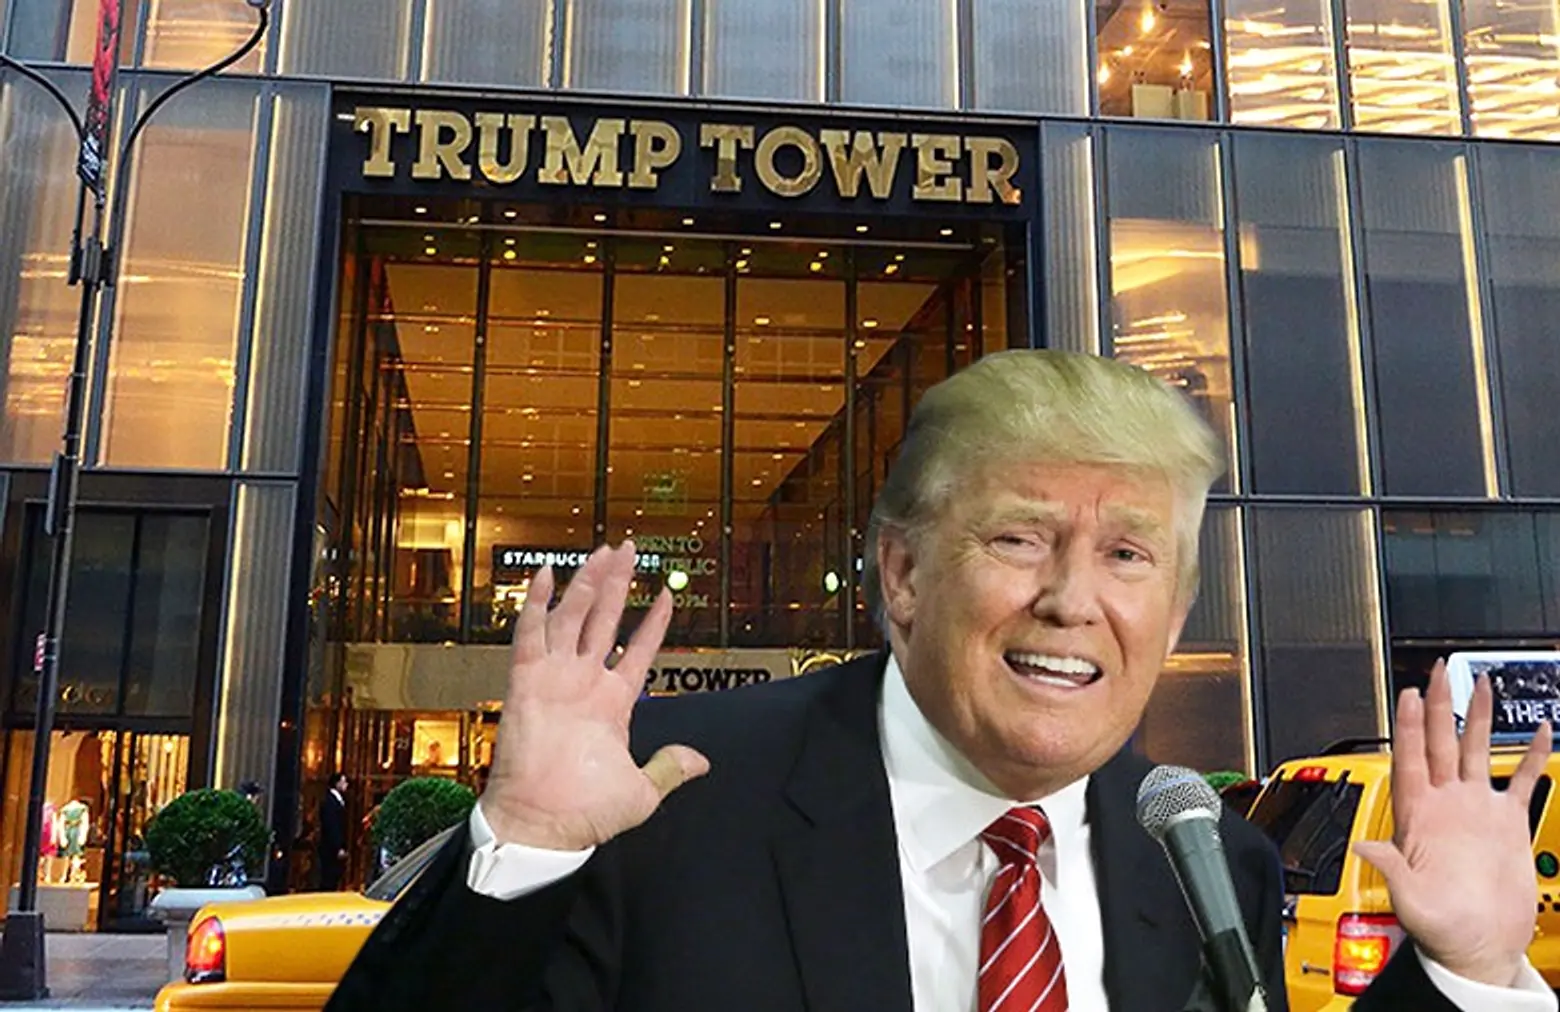 NYC may have to compete for Trump Tower security funds